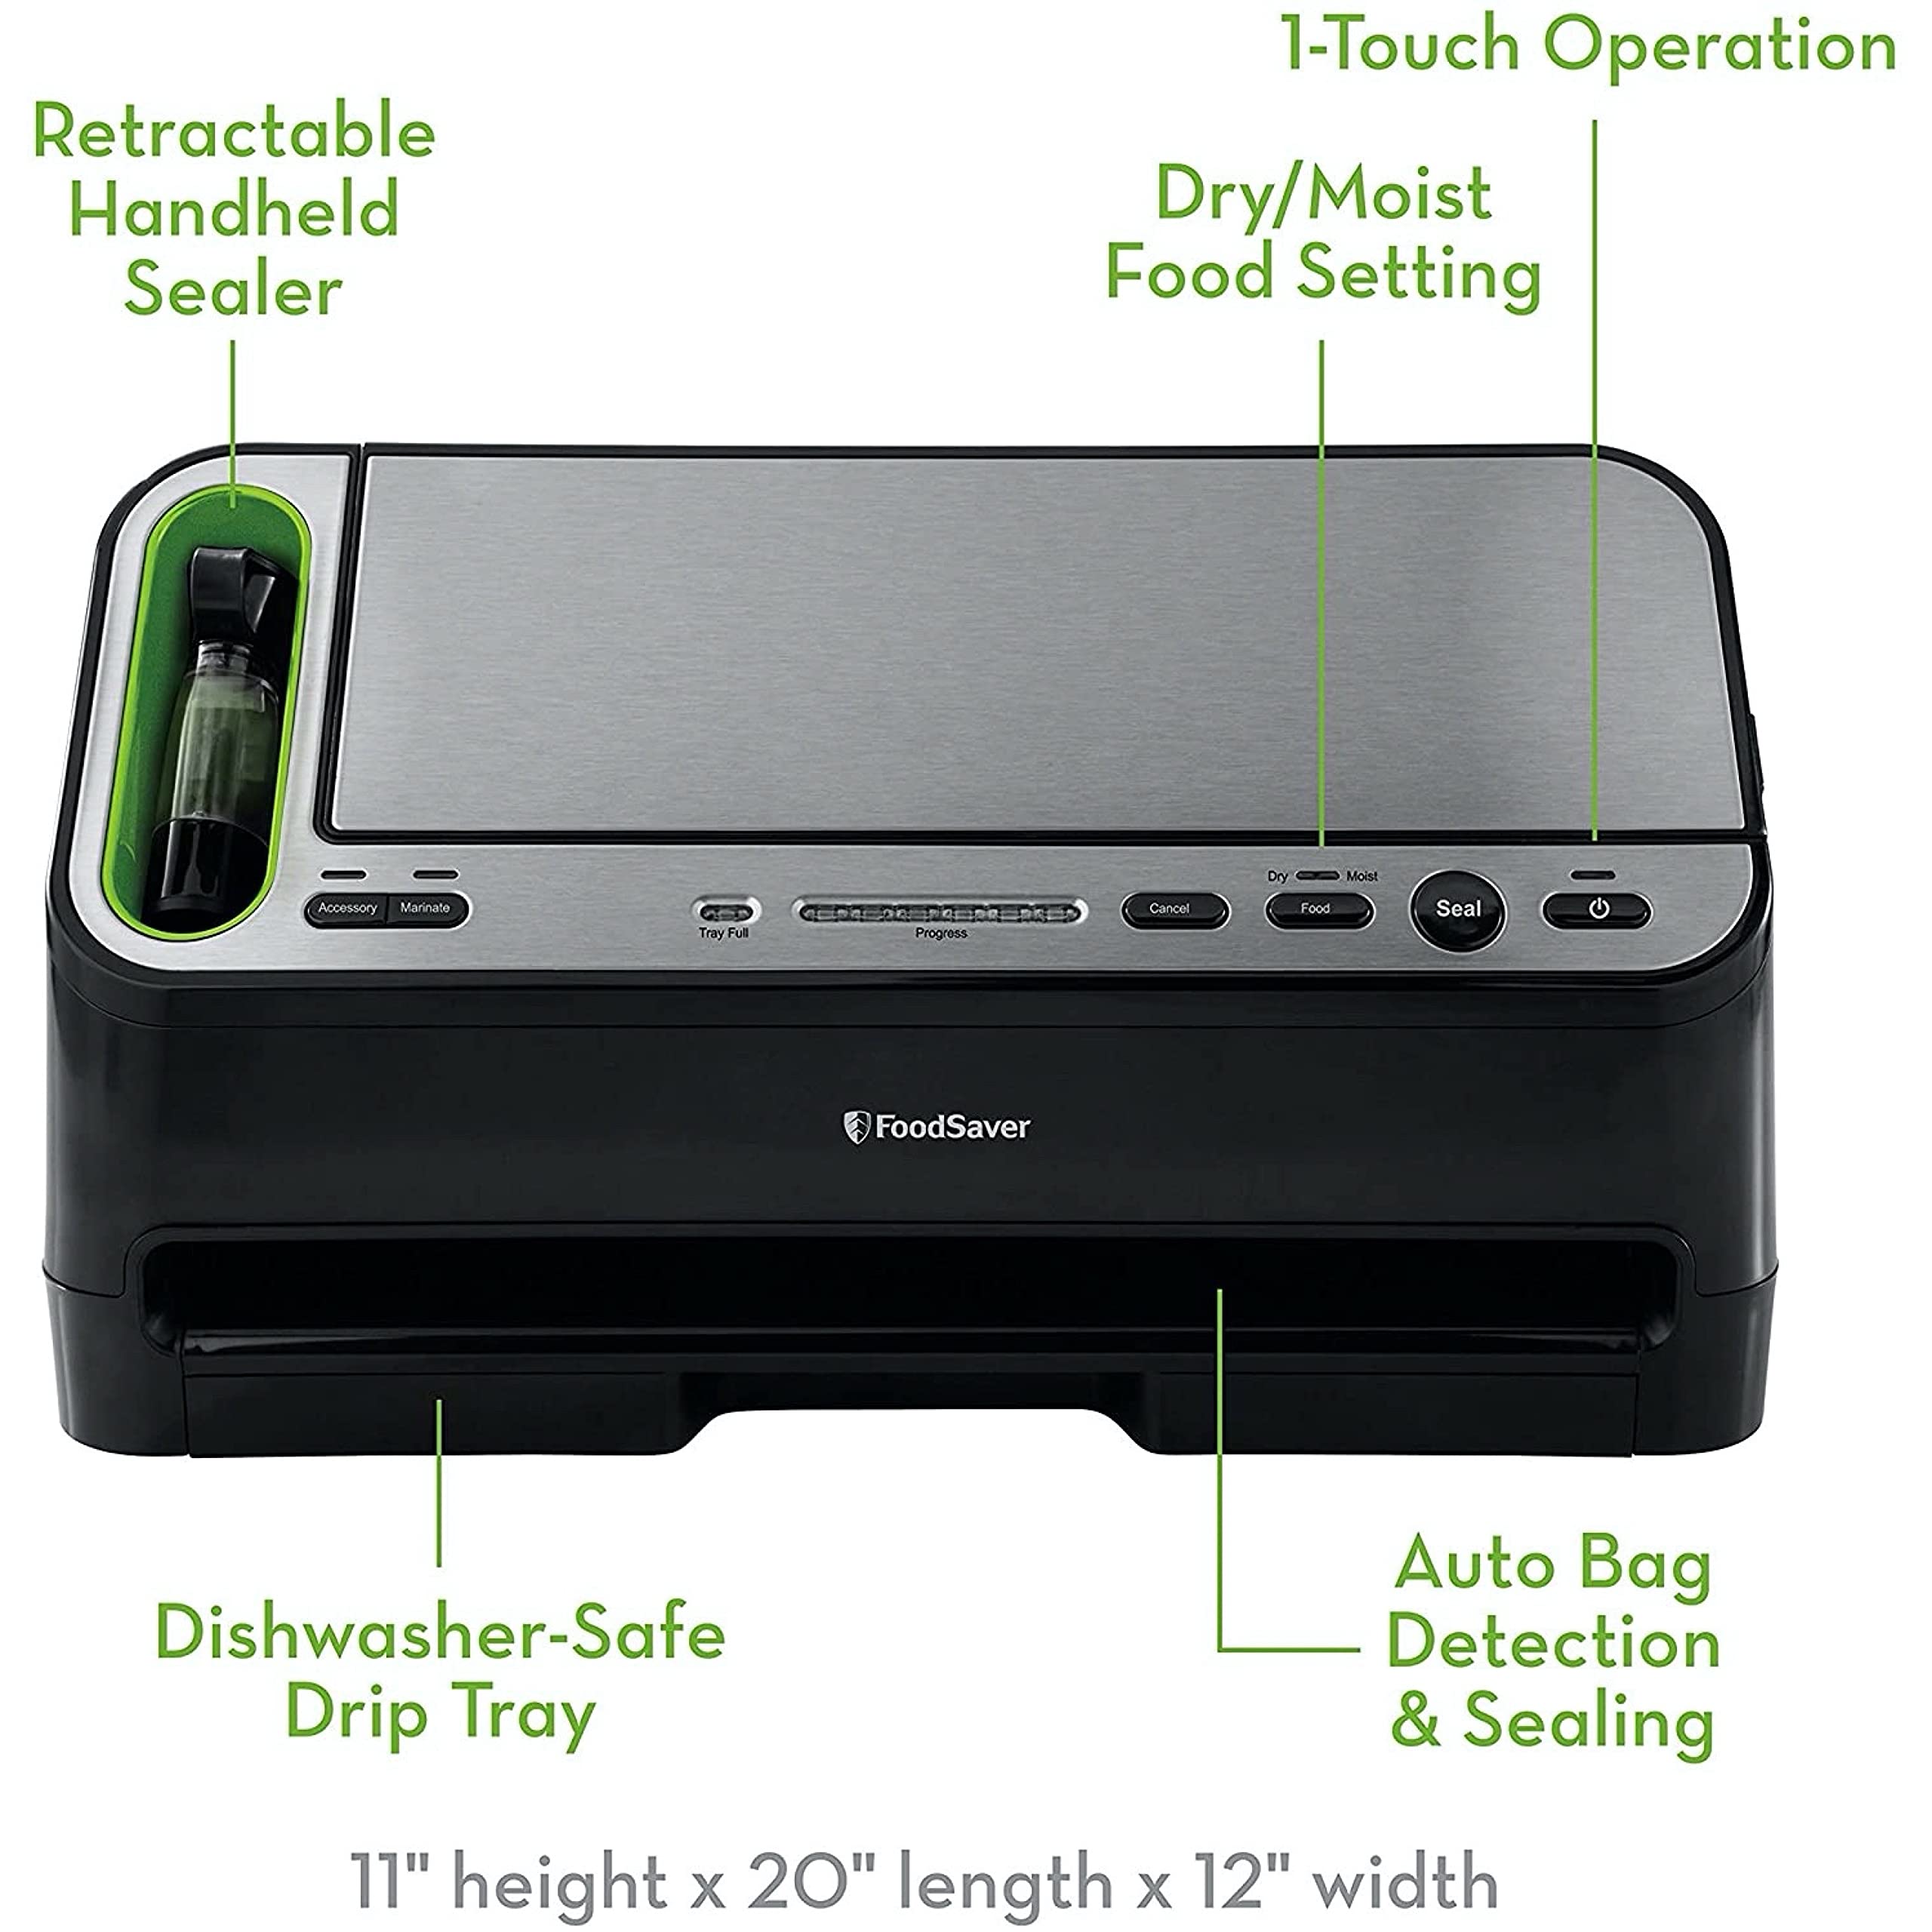 FoodSaver Vacuum Sealer Machine with Automatic Bag Detection, Sealer Bags and Roll, and Handheld Vacuum Sealer for Airtight Food Storage and Sous Vide, Silver